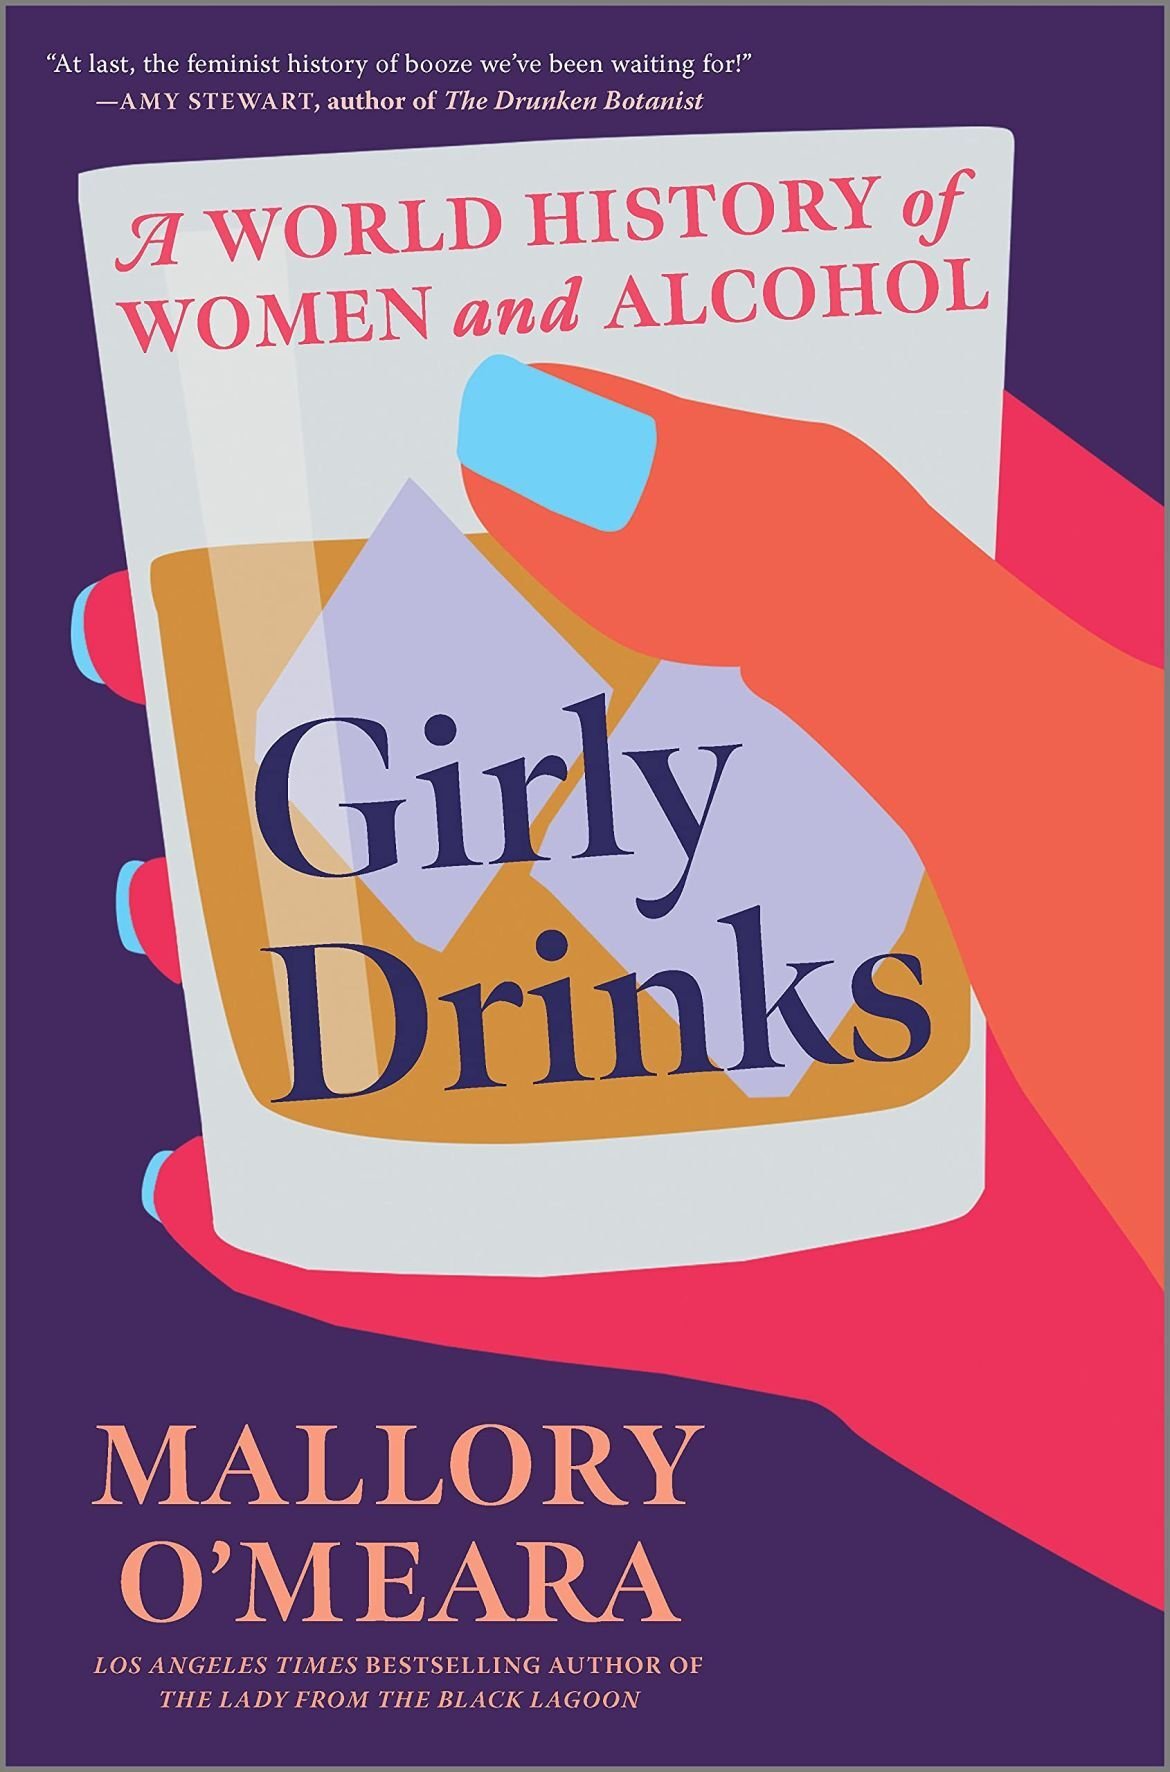 'Girly Drinks: A World History of Women and Alcohol'